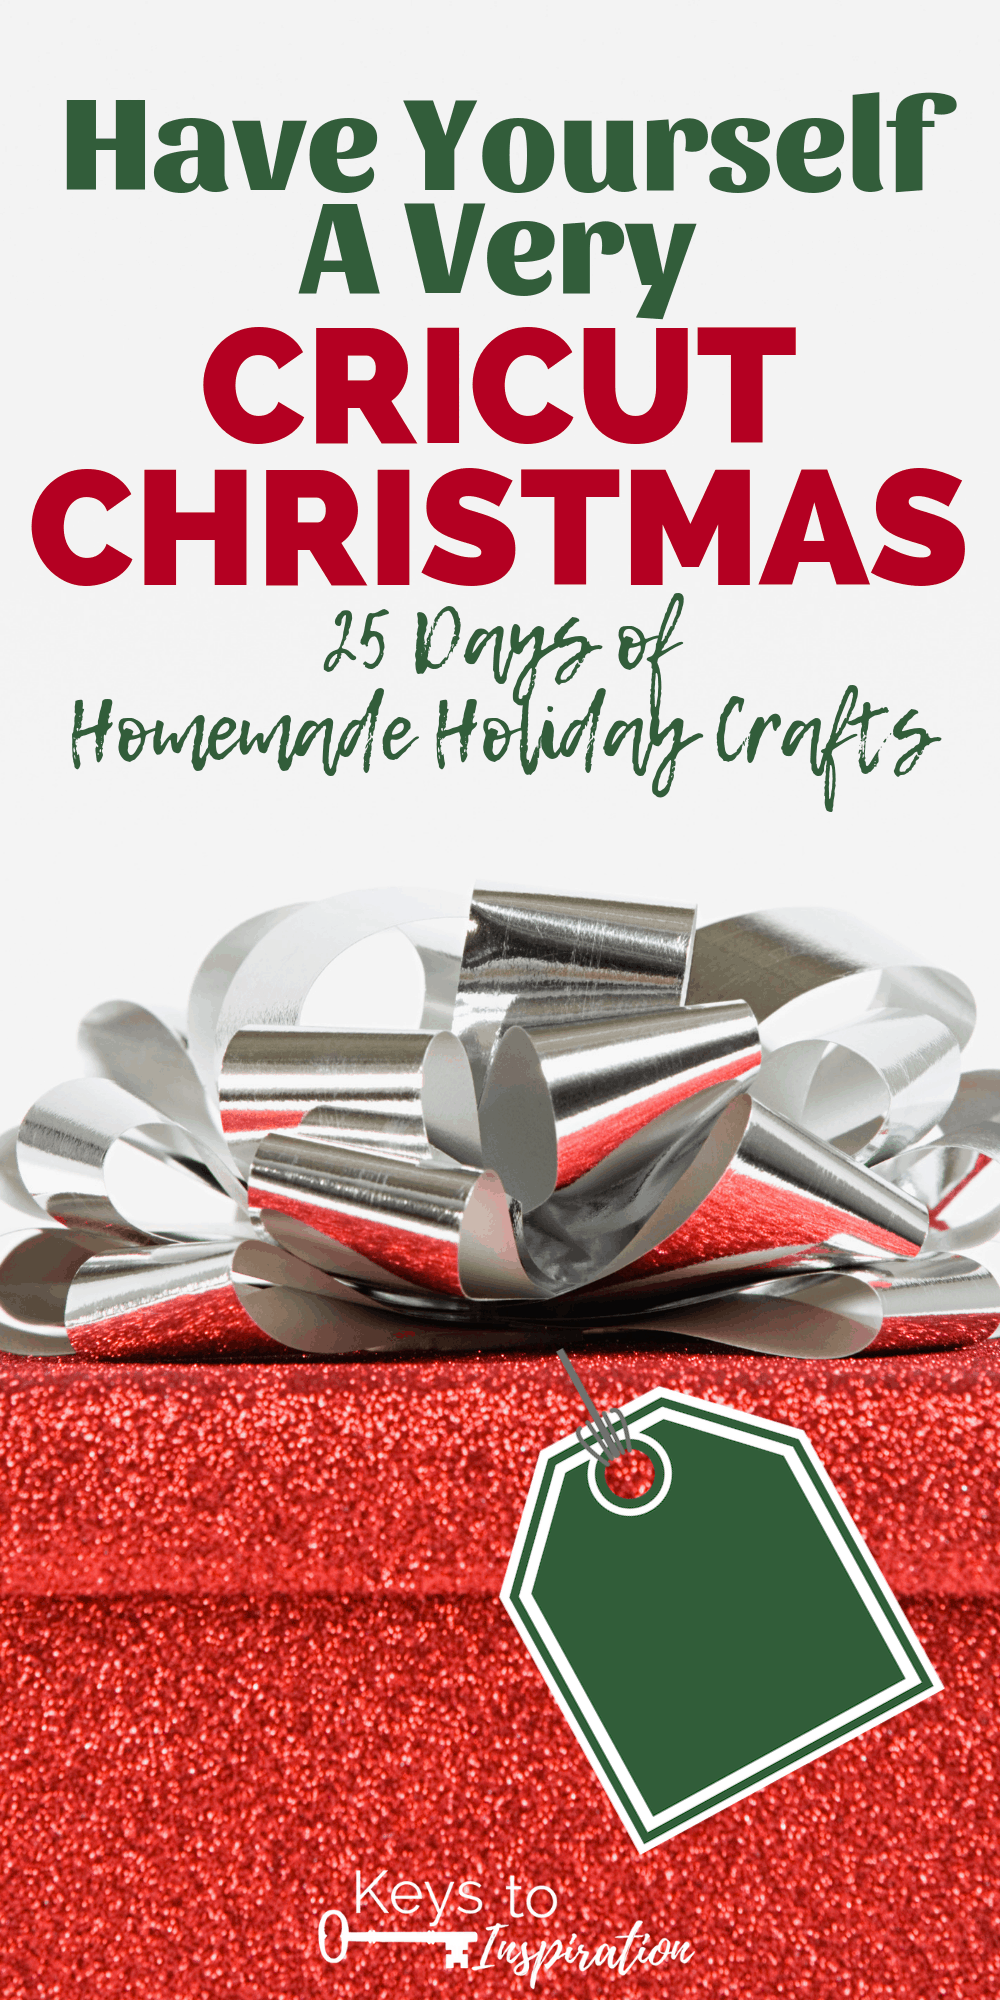 Have Yourself A Very Cricut Christmas: 25 Days of Homemade Holiday Crafts